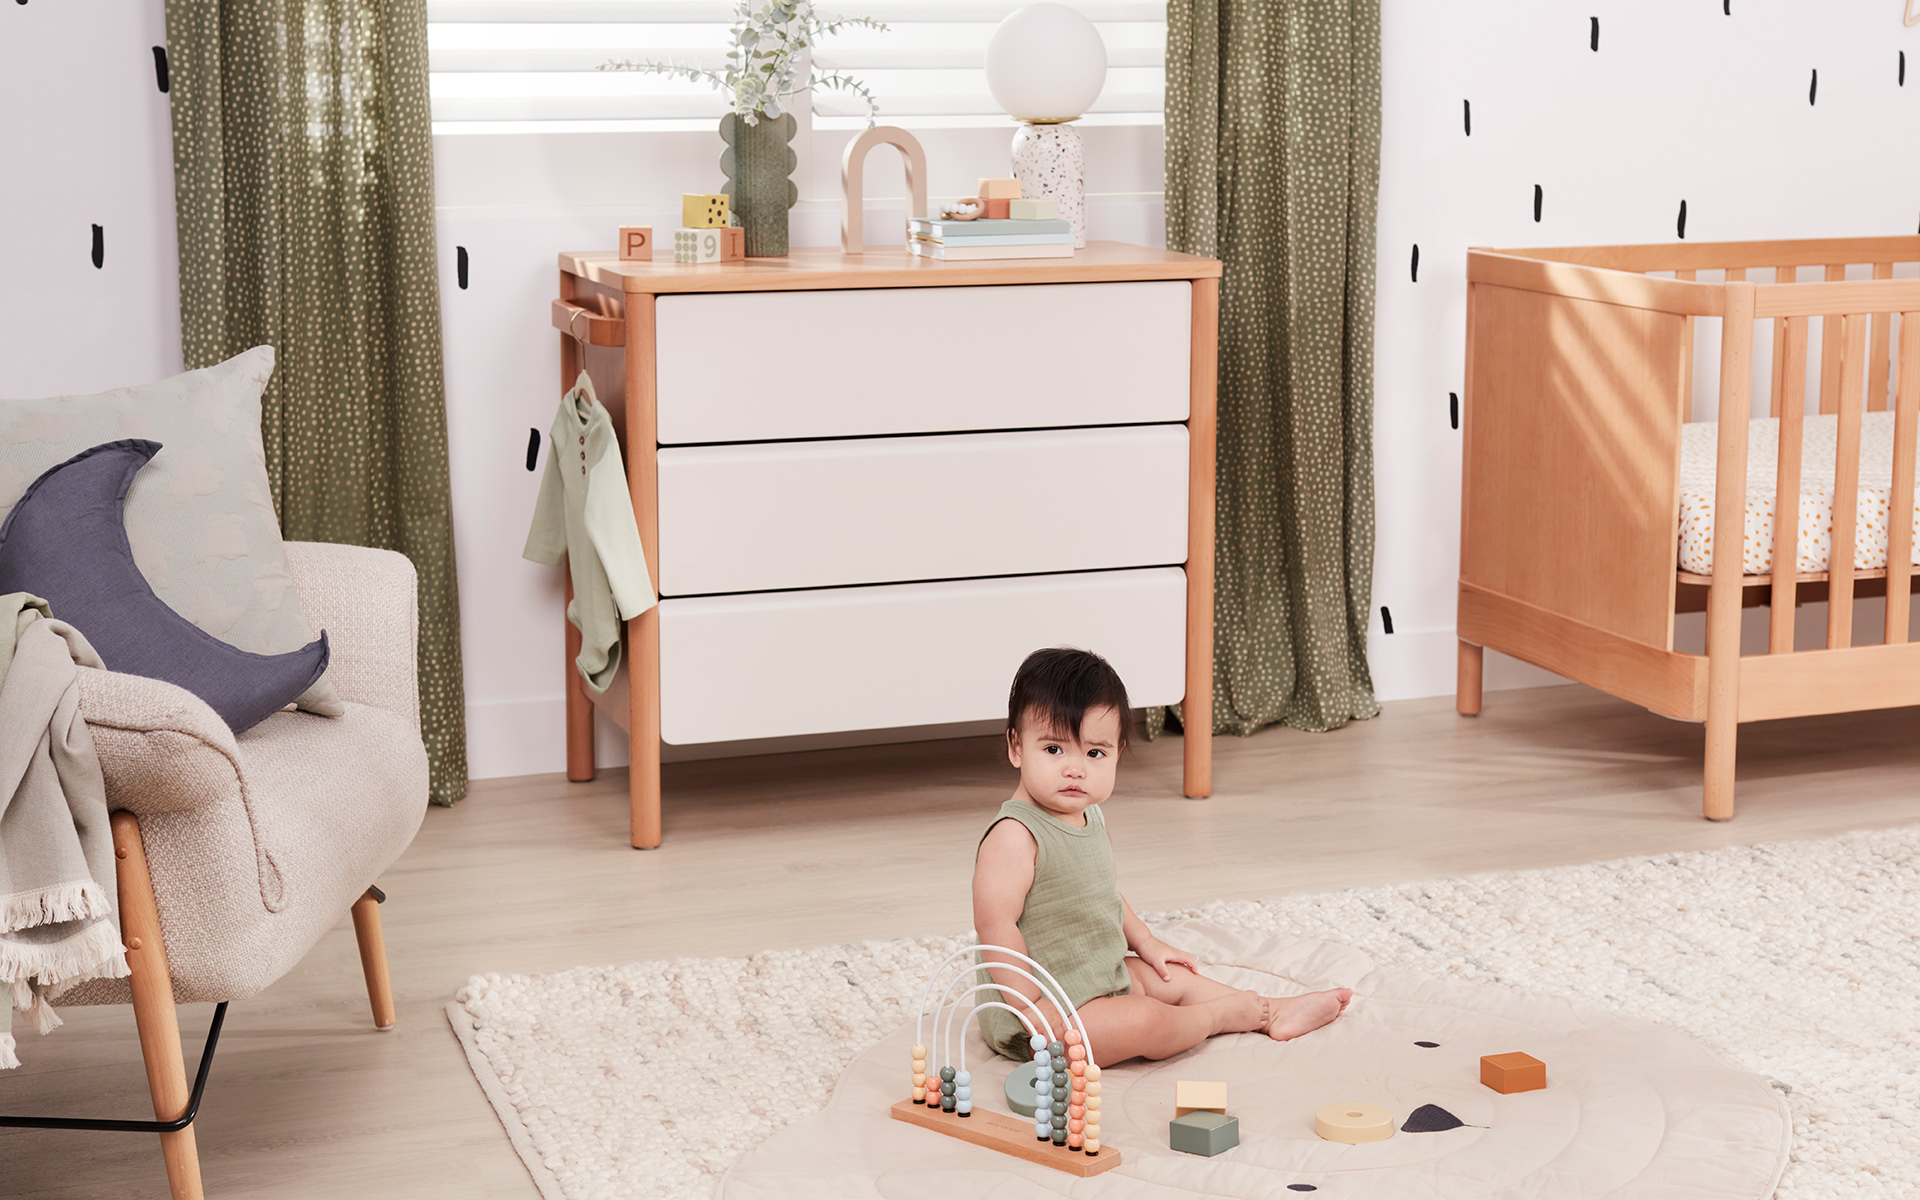 A baby sits on a rug in their room surrounded by kids furniture such as a cot and chest of drawers